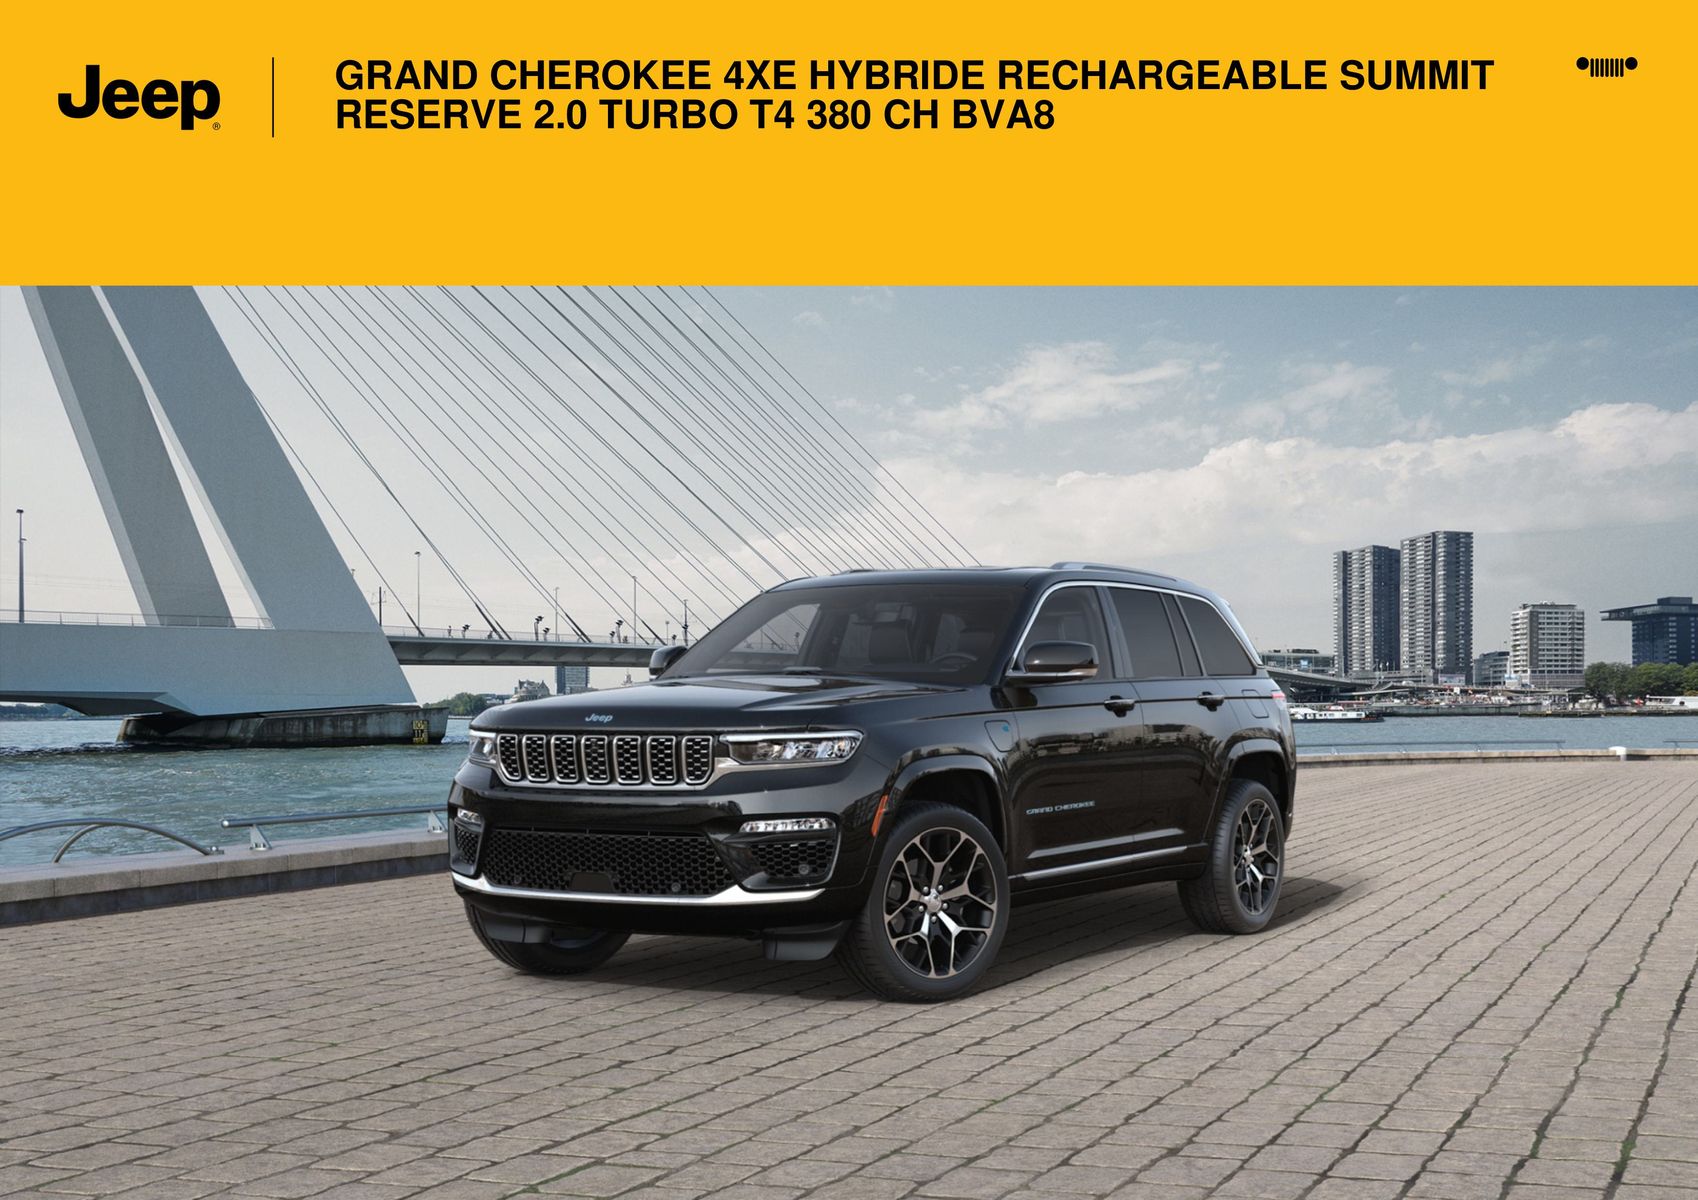 Catalogue GRAND CHEROKEE 4XE HYBRIDE RECHARGEABLE SUMMIT RESERVE 2.0 TURBO T4 380 CH BVA8_, page 00001